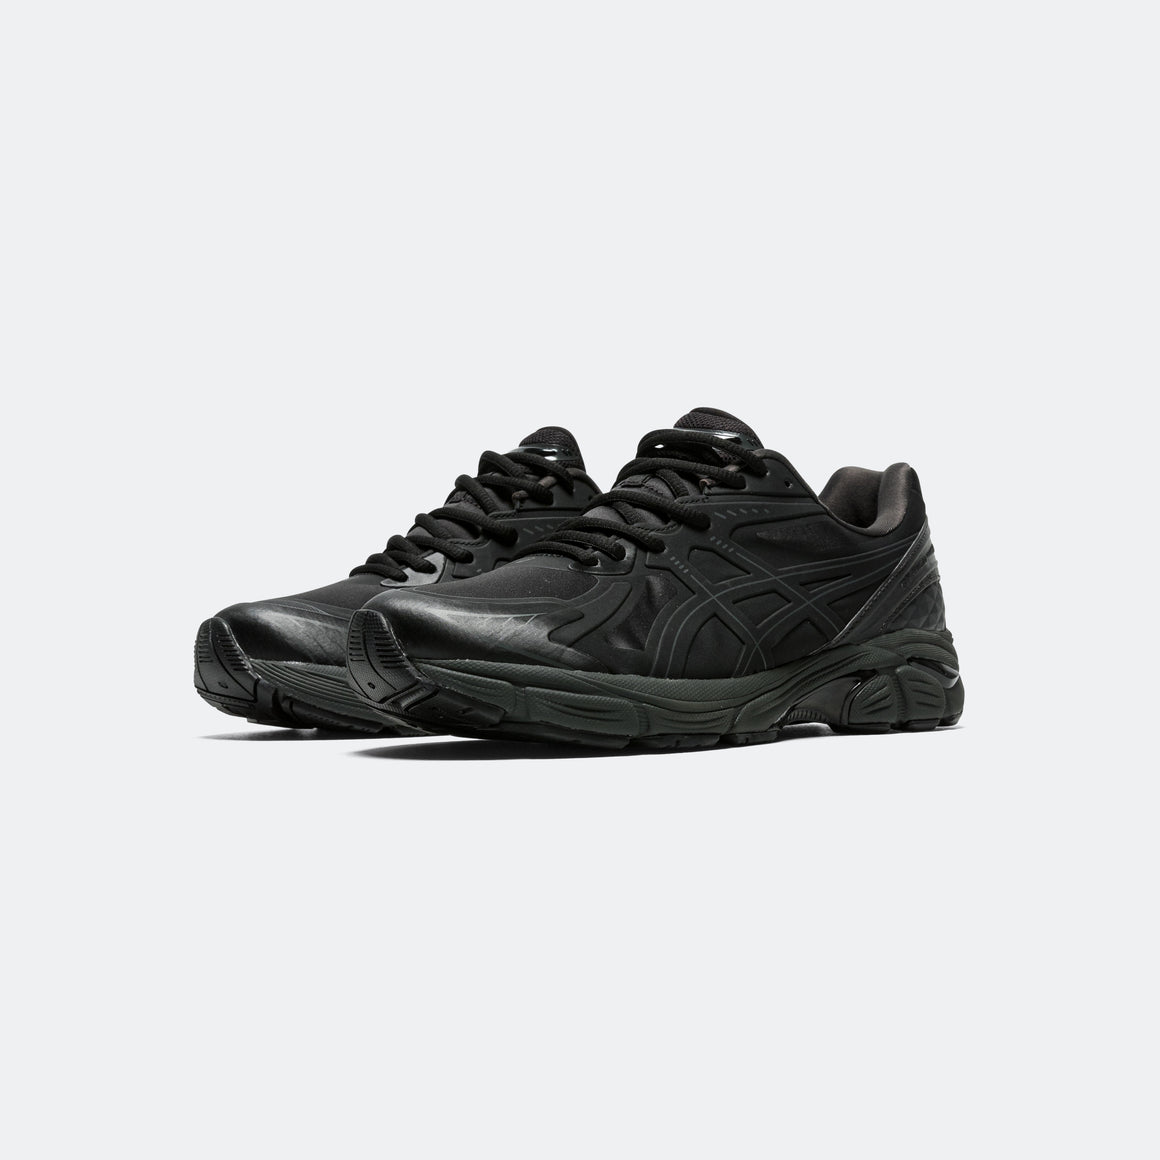 Asics - GT-2160 NS - Black/Graphite Grey - UP THERE